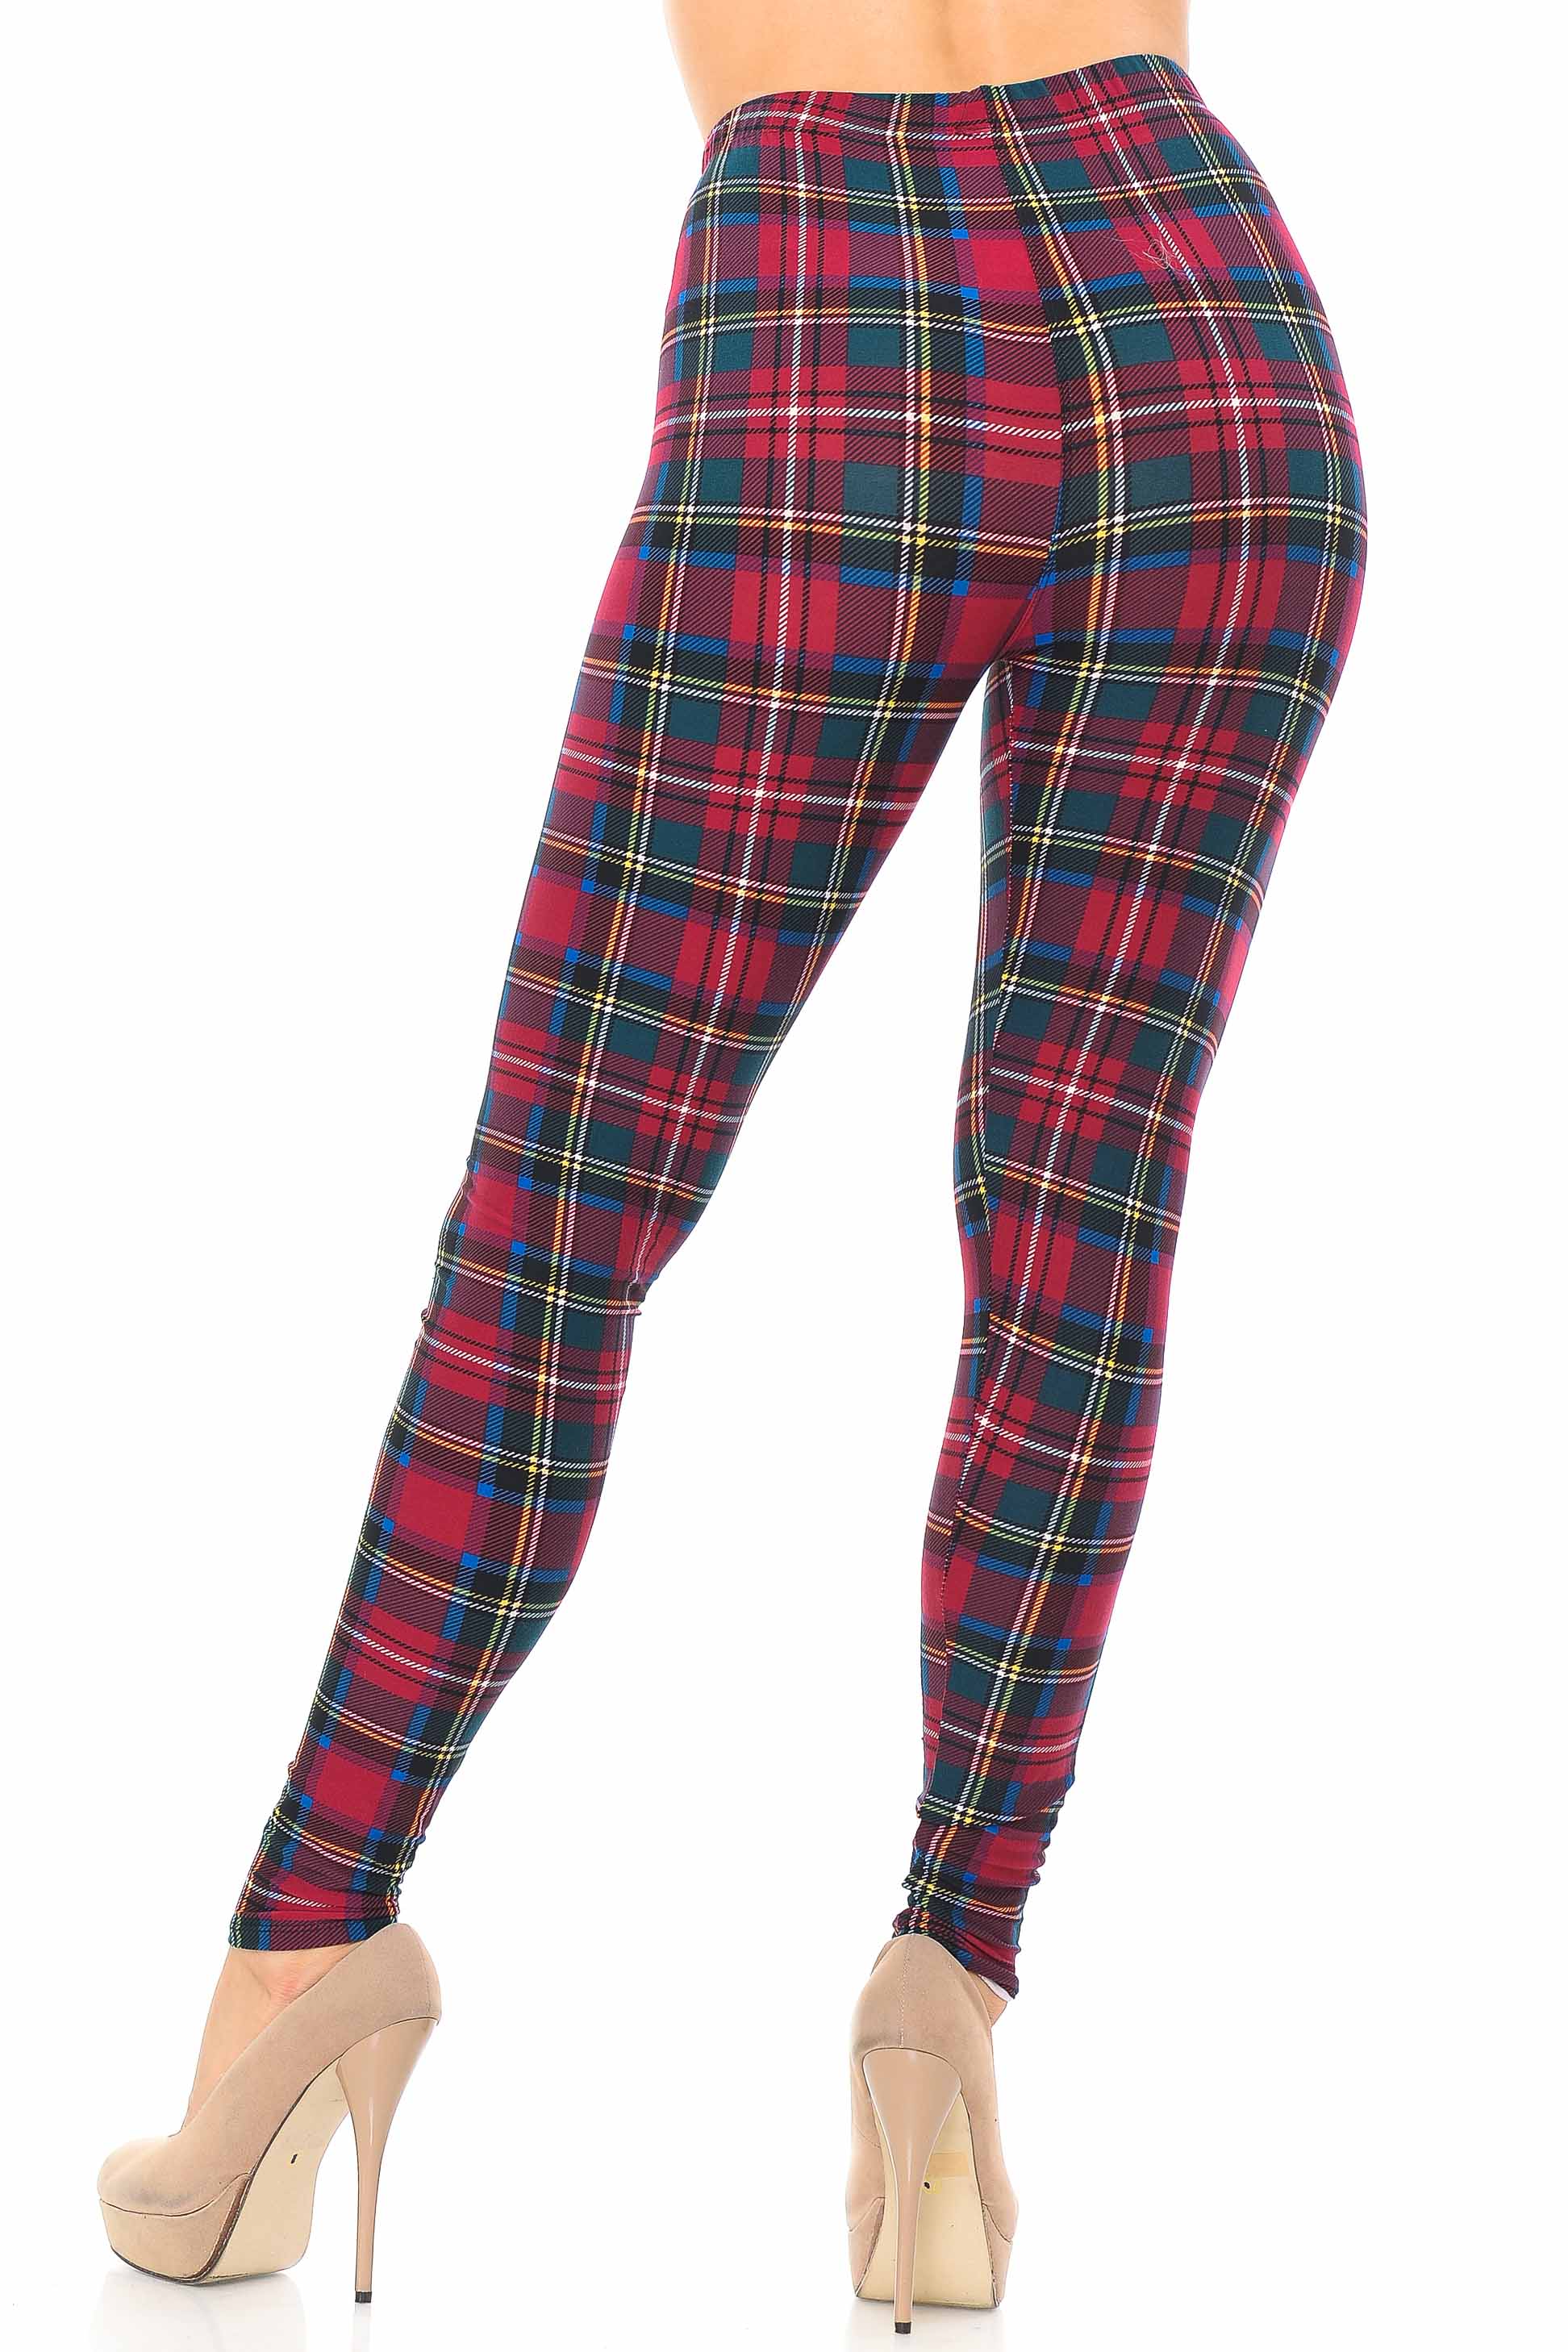 Wholesale Buttery Smooth Modish Plaid Leggings